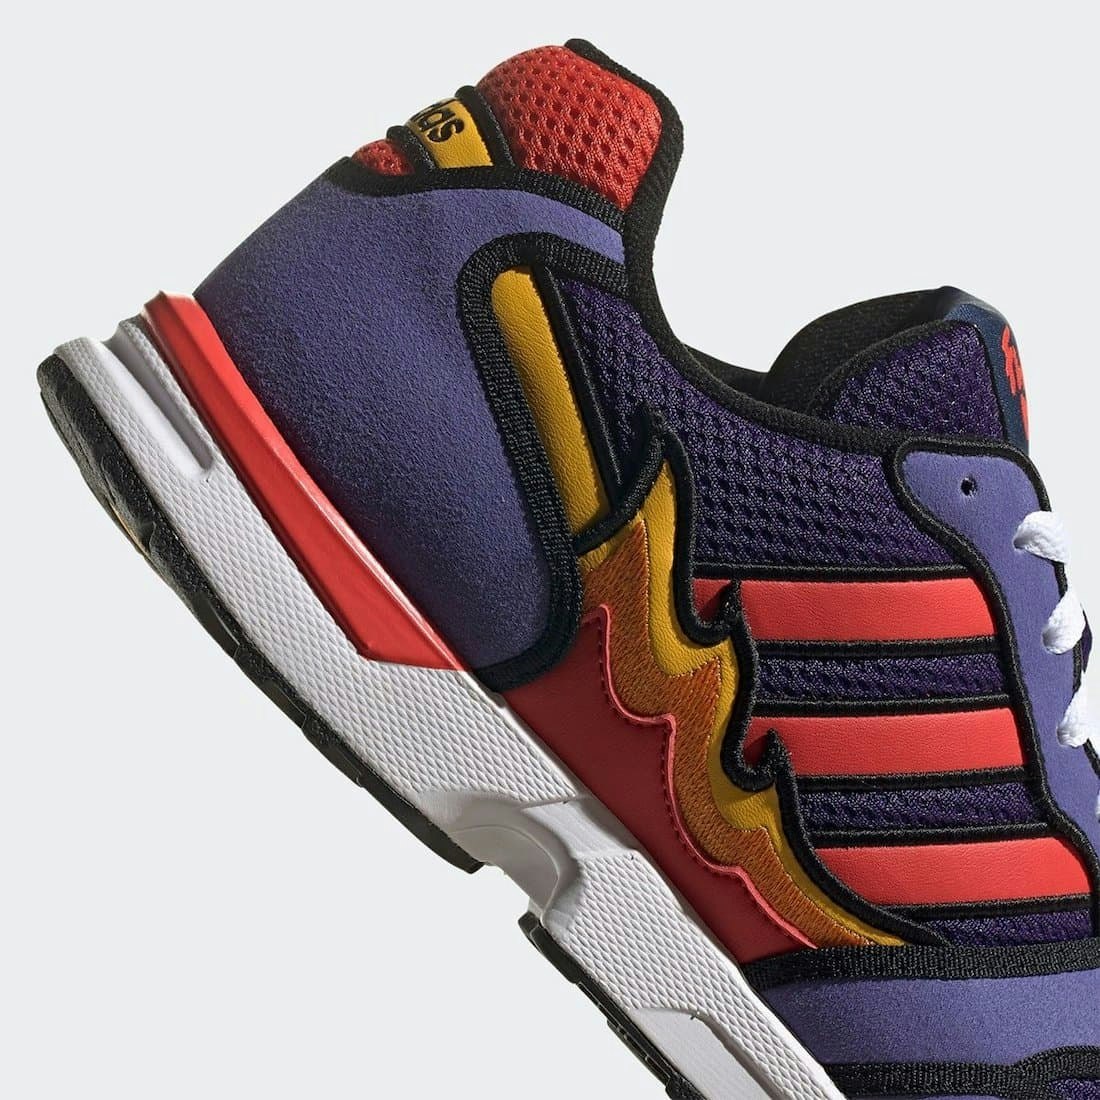 The Simpsons x adidas ZX 1000 “Flaming Moe’s”